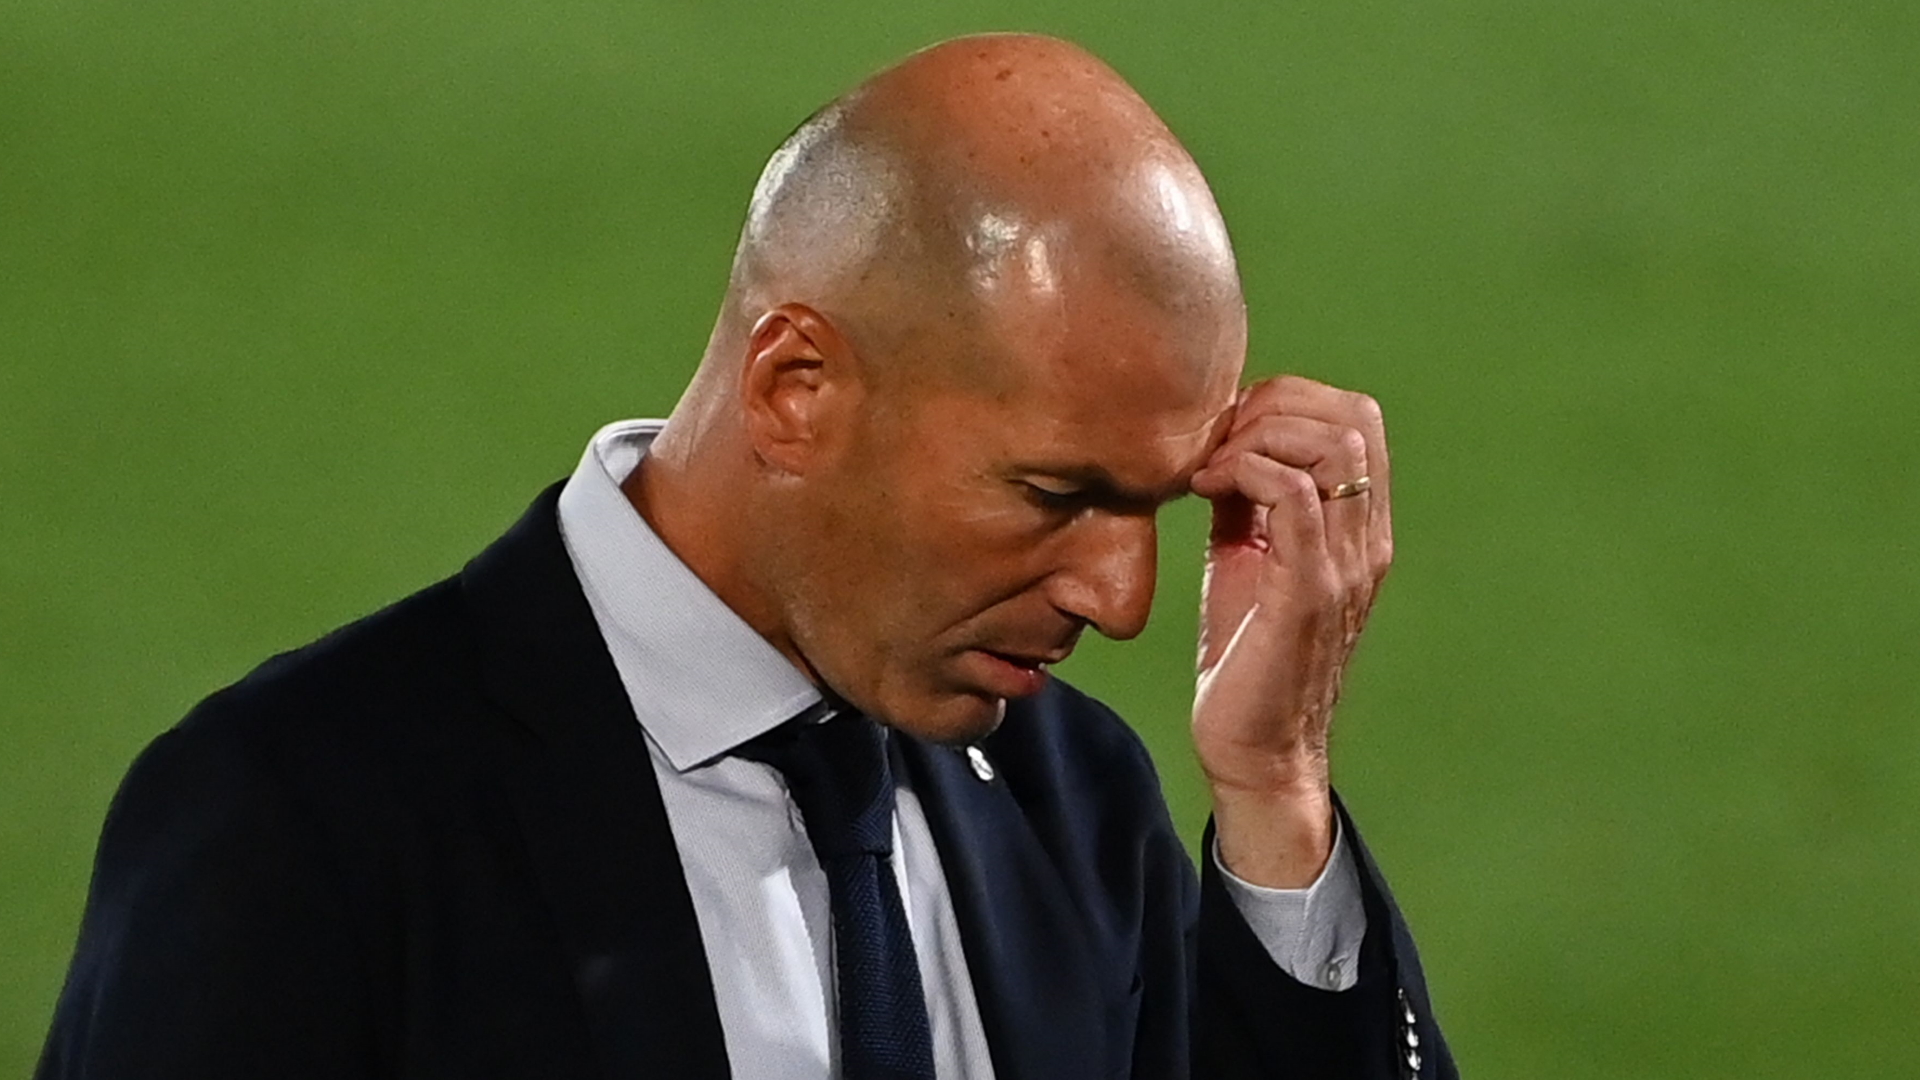 'You have to ask the players if I still have their support' – Zidane on Real Madrid's Copa del Rey embarrassment